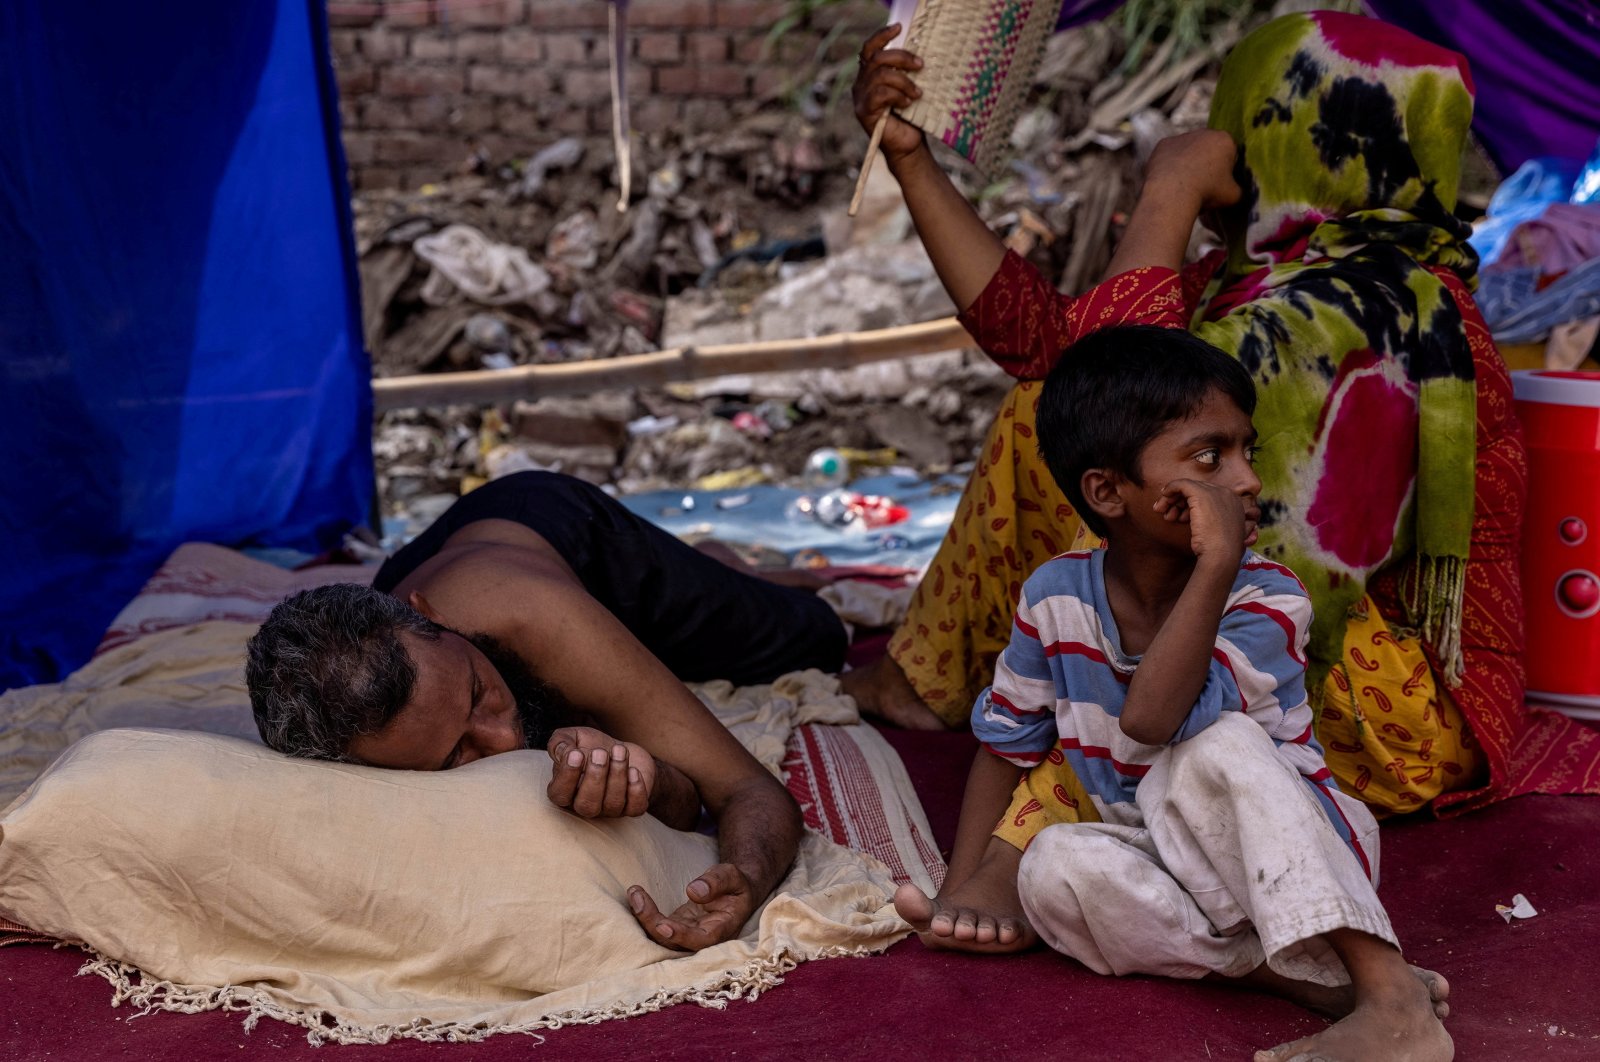 A Rohingya refugee family rests in a temporary shelter after a fire destroyed a Rohingya refugee camp, in New Delhi, India, June 14, 2021 (Reuters Photo)